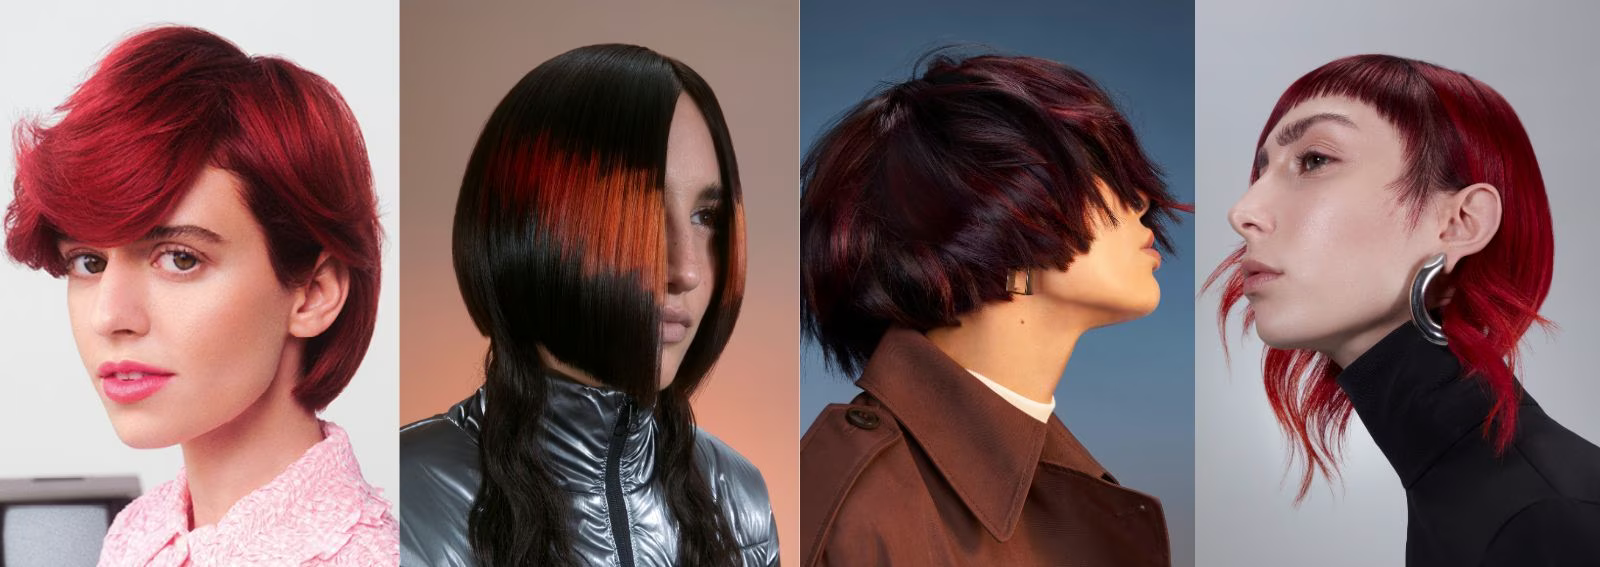 black-hair-red-highlights-hair-cuts-style-inspiration